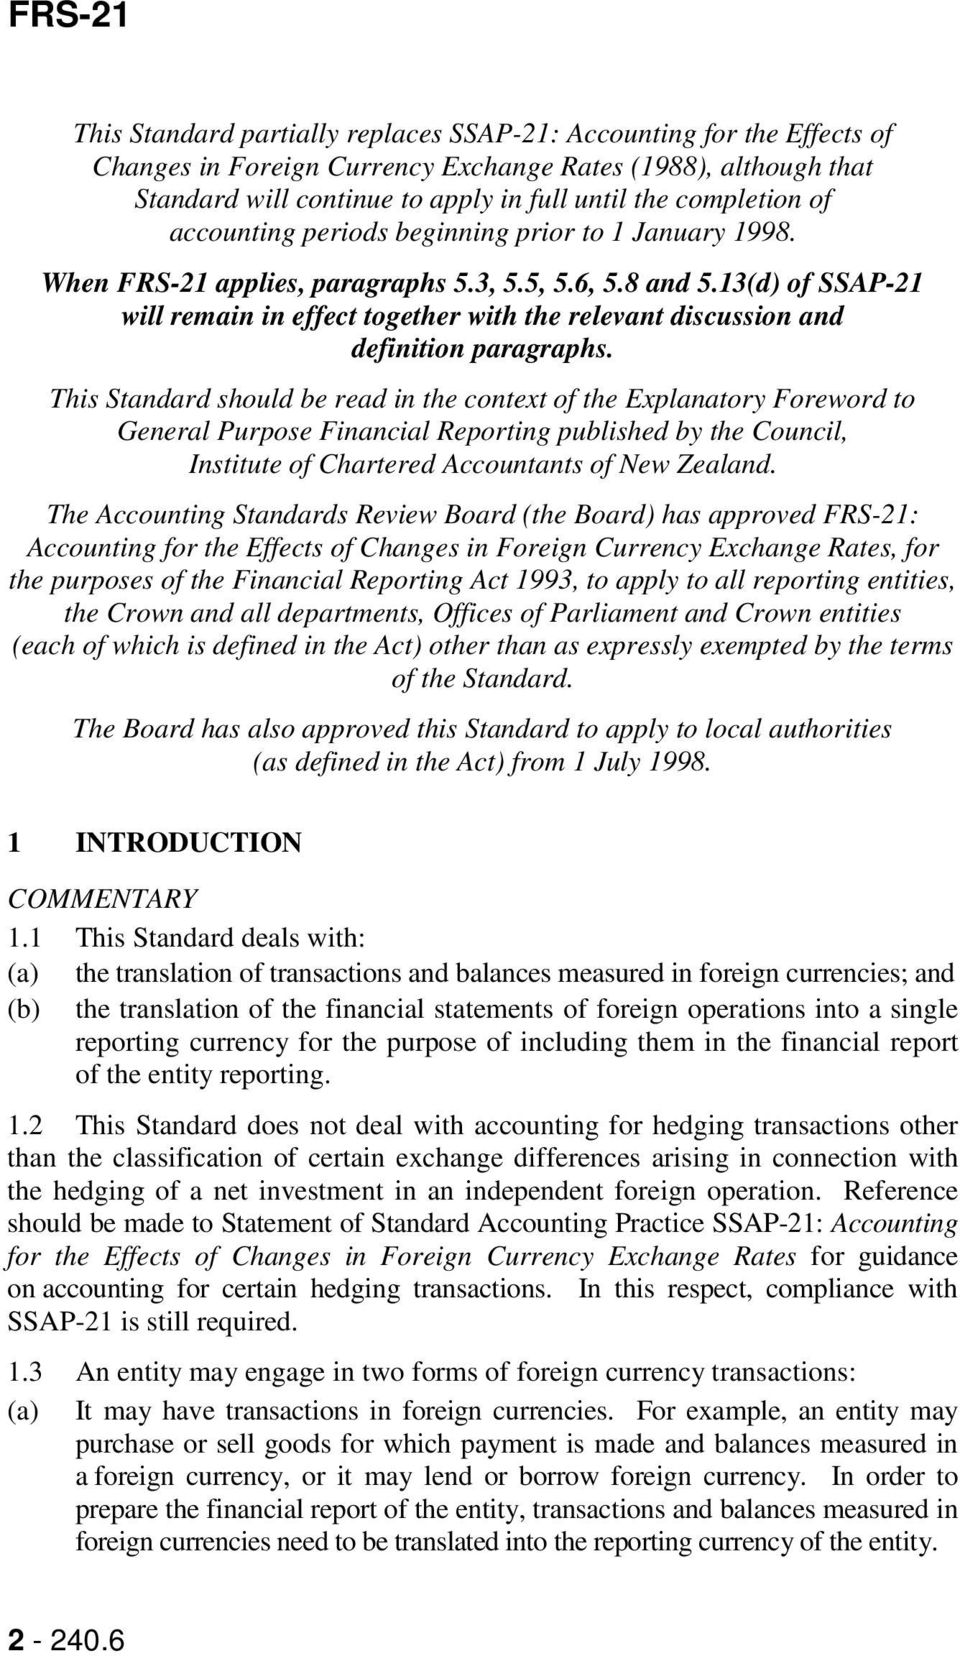 13(d) of SSAP-21 will remain in effect together with the relevant discussion and definition paragraphs.